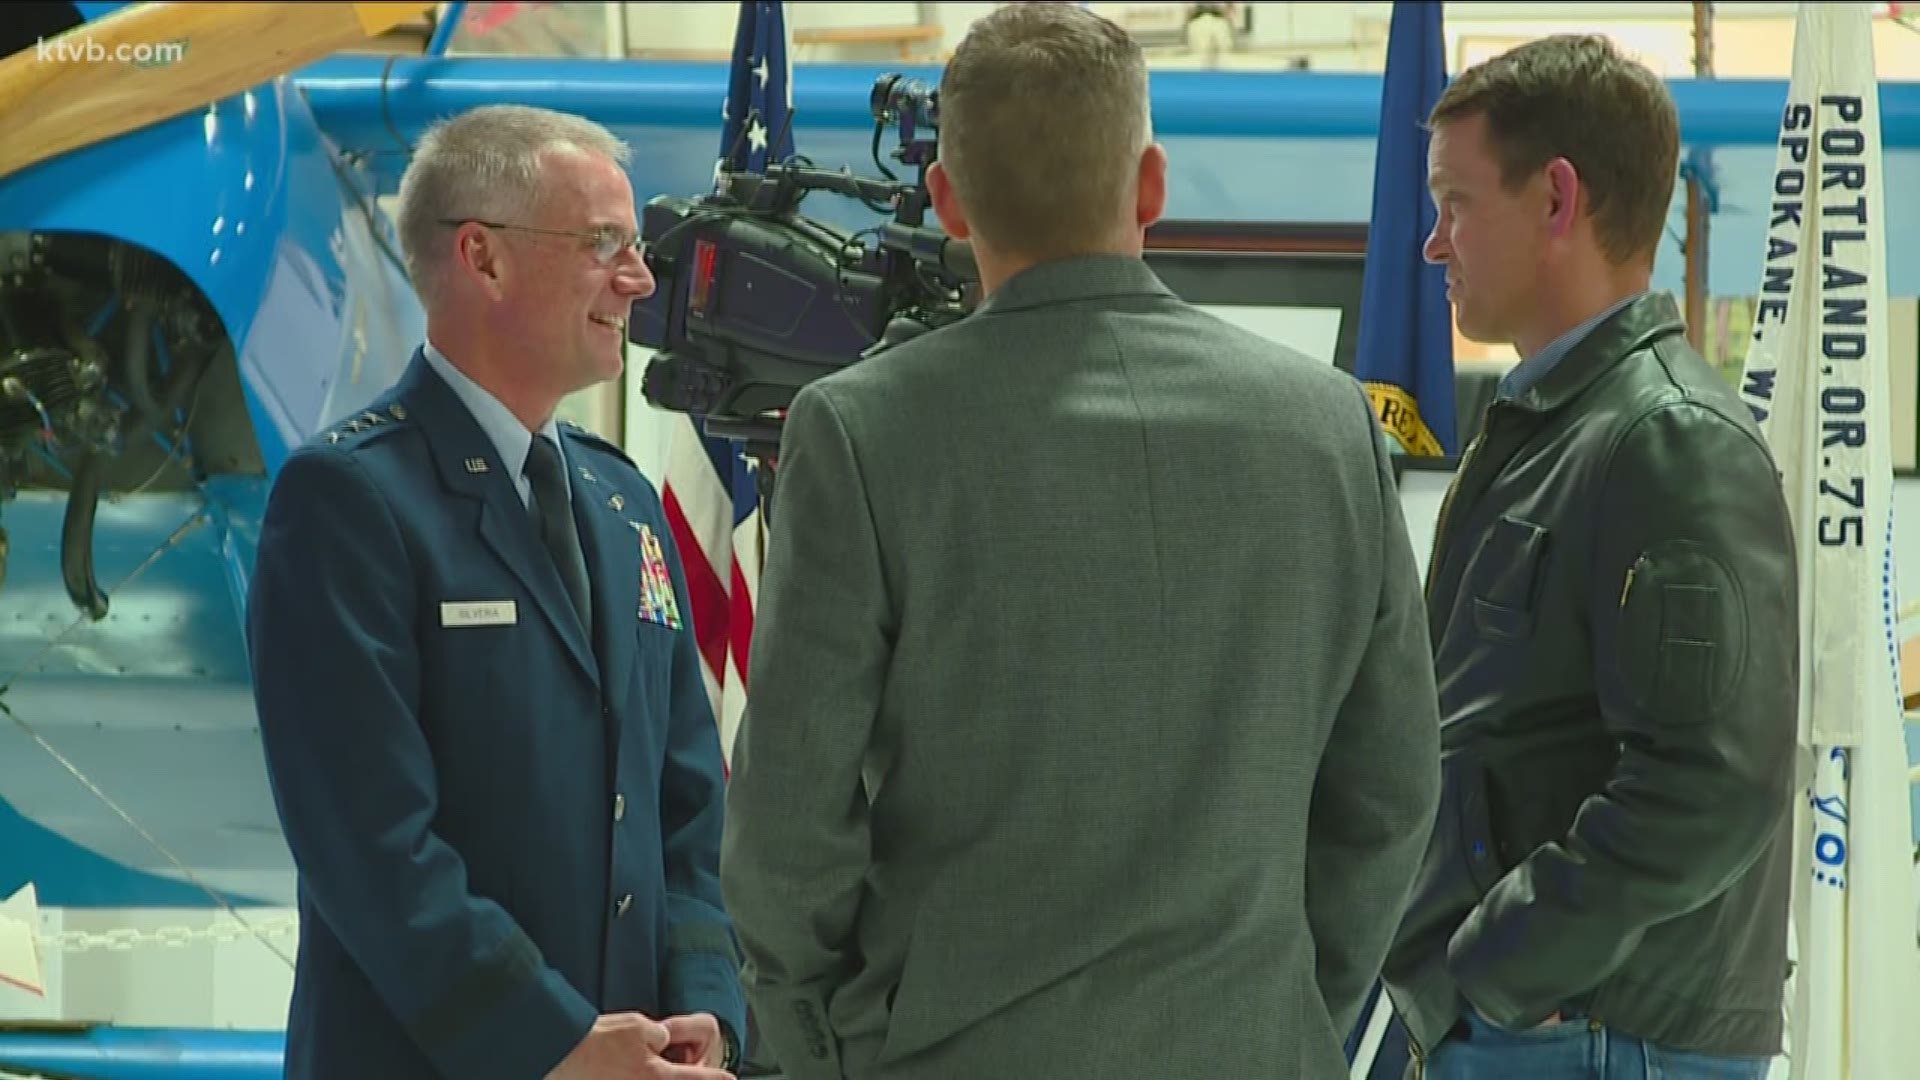 Lt. Gen. Jay Silveria said he chose to visit the Treasure Valley because of the area's deep ties to the Air Force.